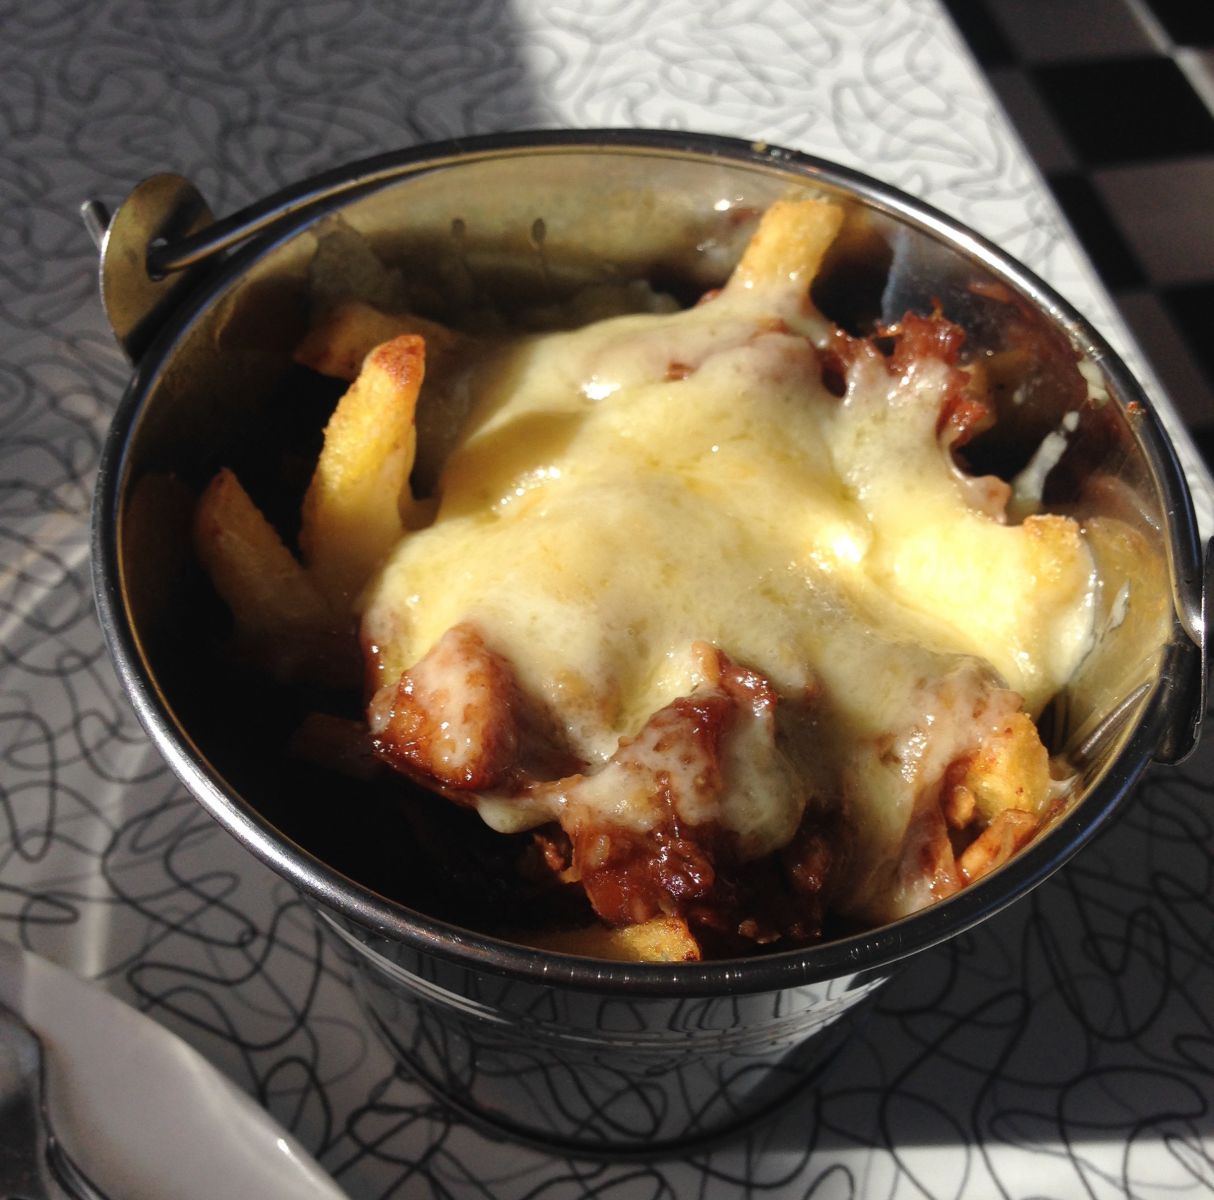 Dirty fries at The Tube Diner - Bristol